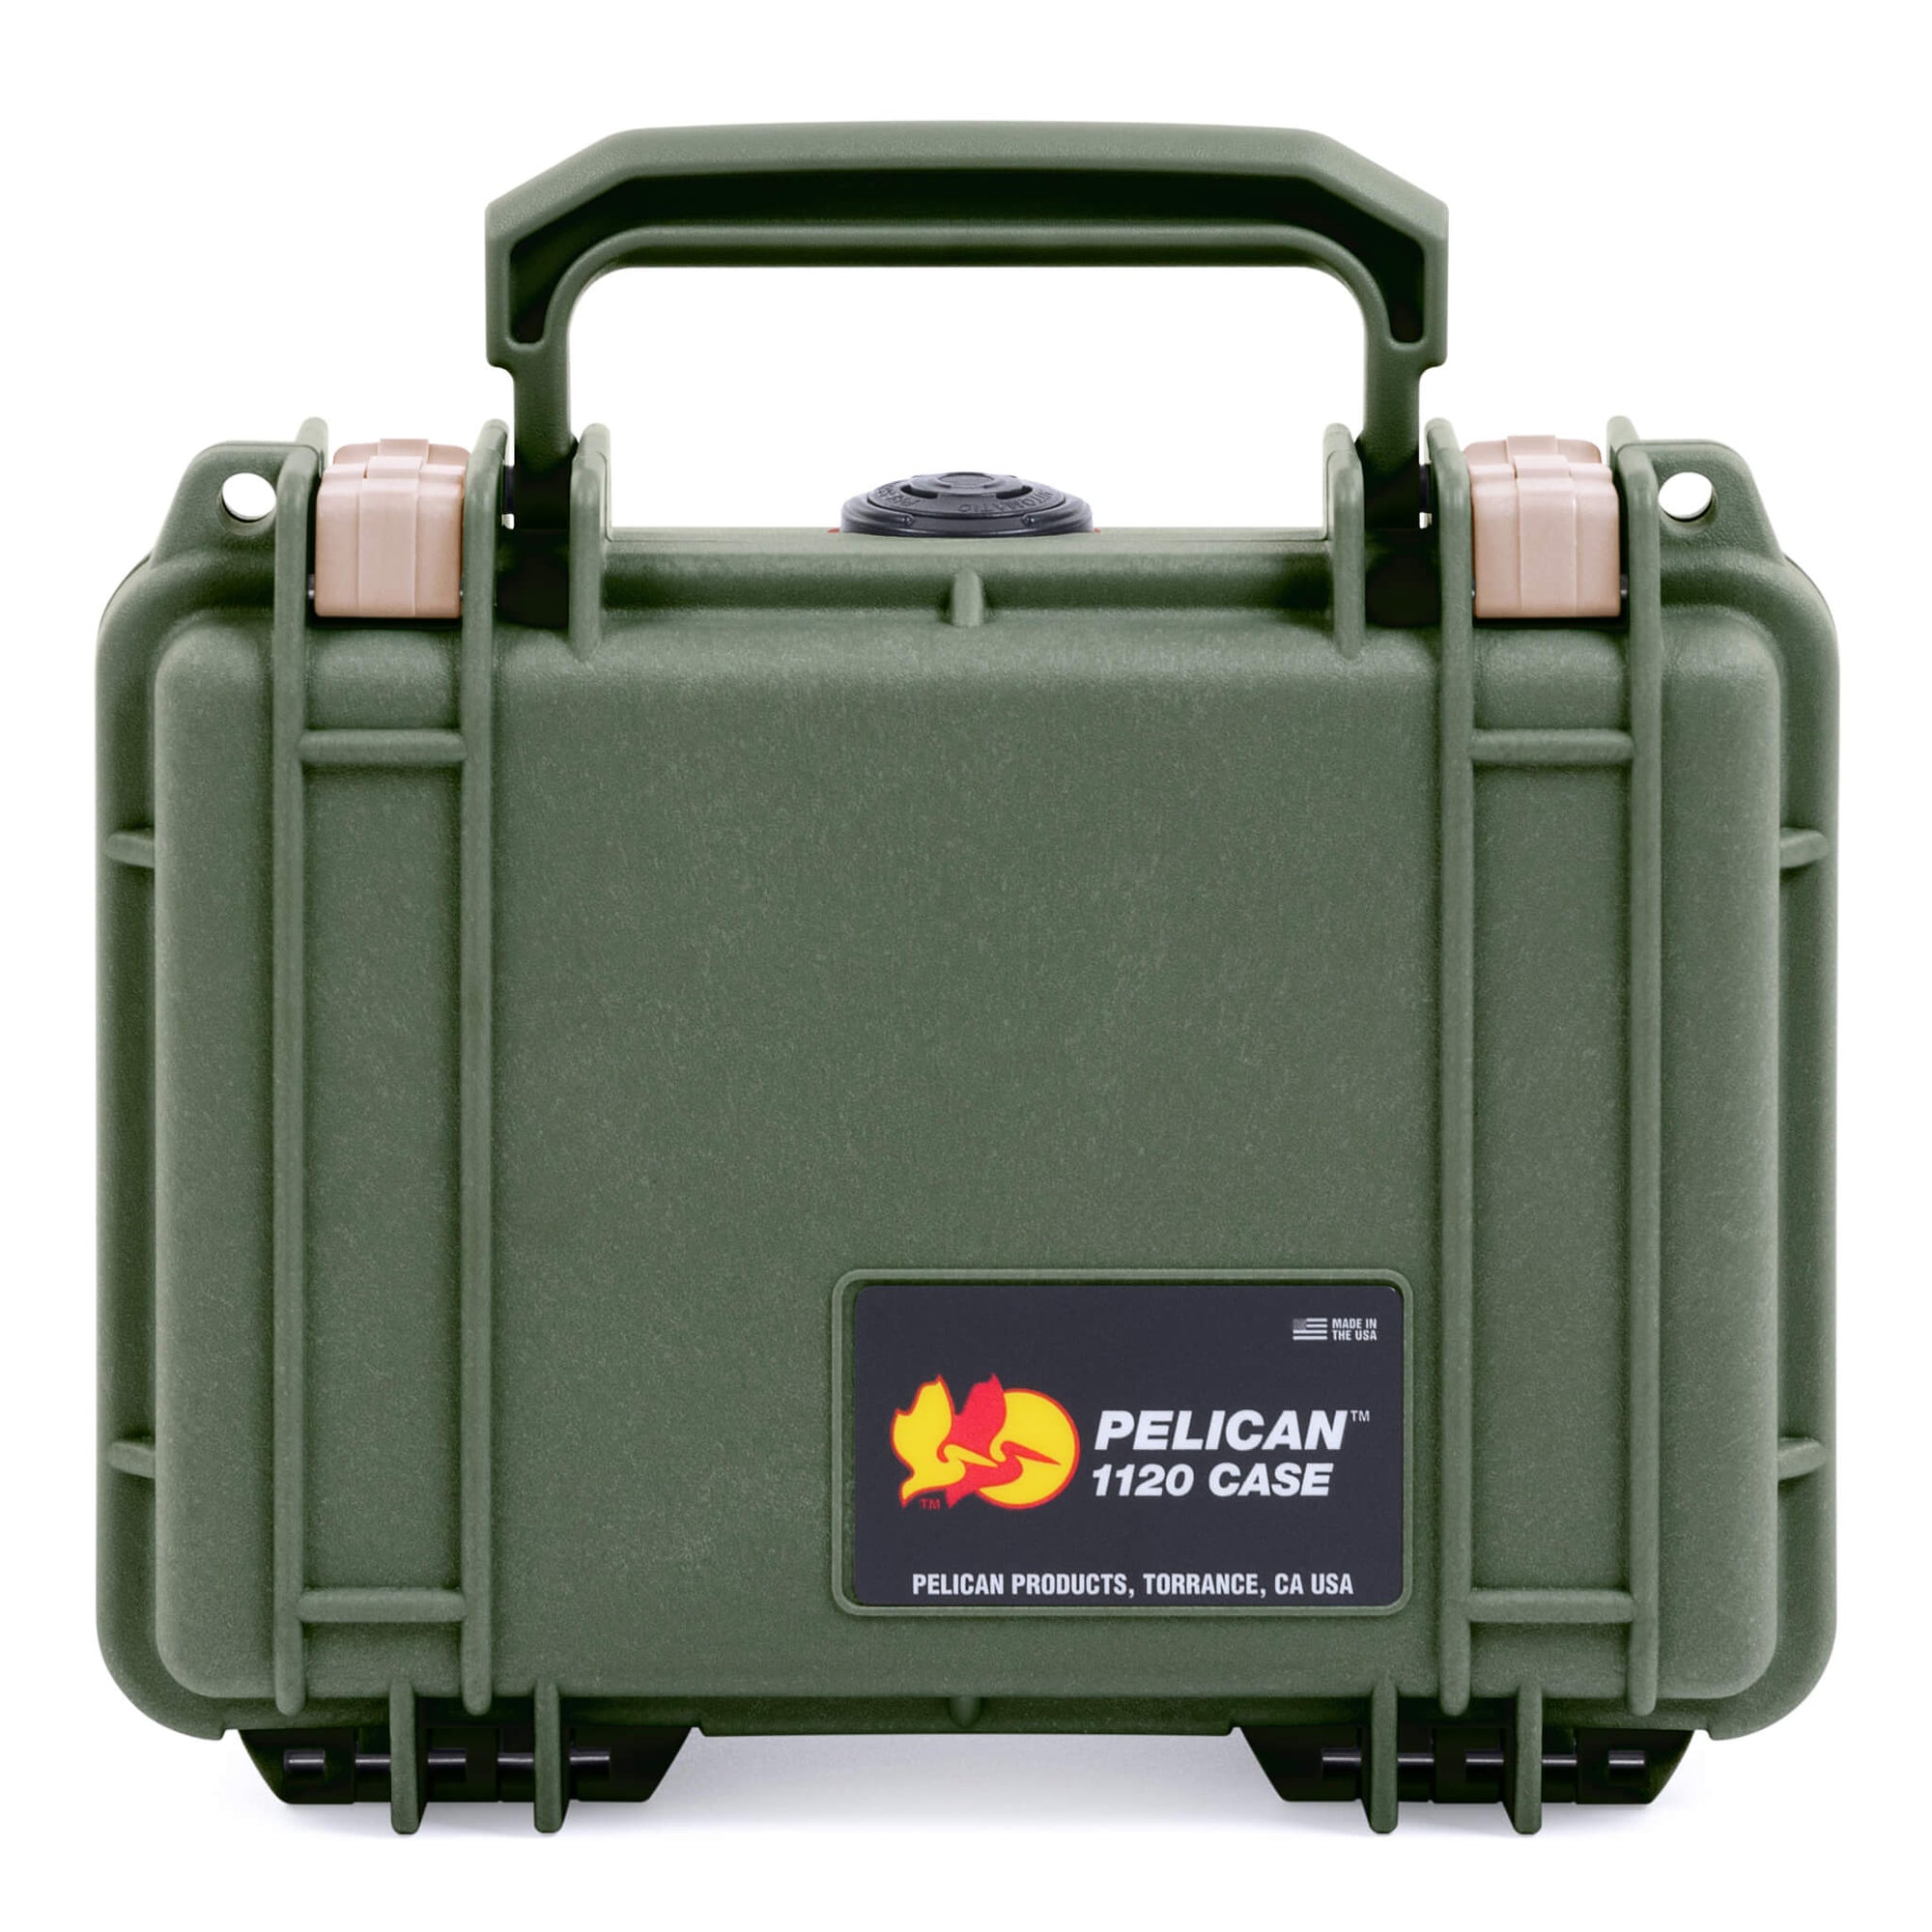 Pelican 1120 Case, OD Green with Desert Tan Latches ColorCase 